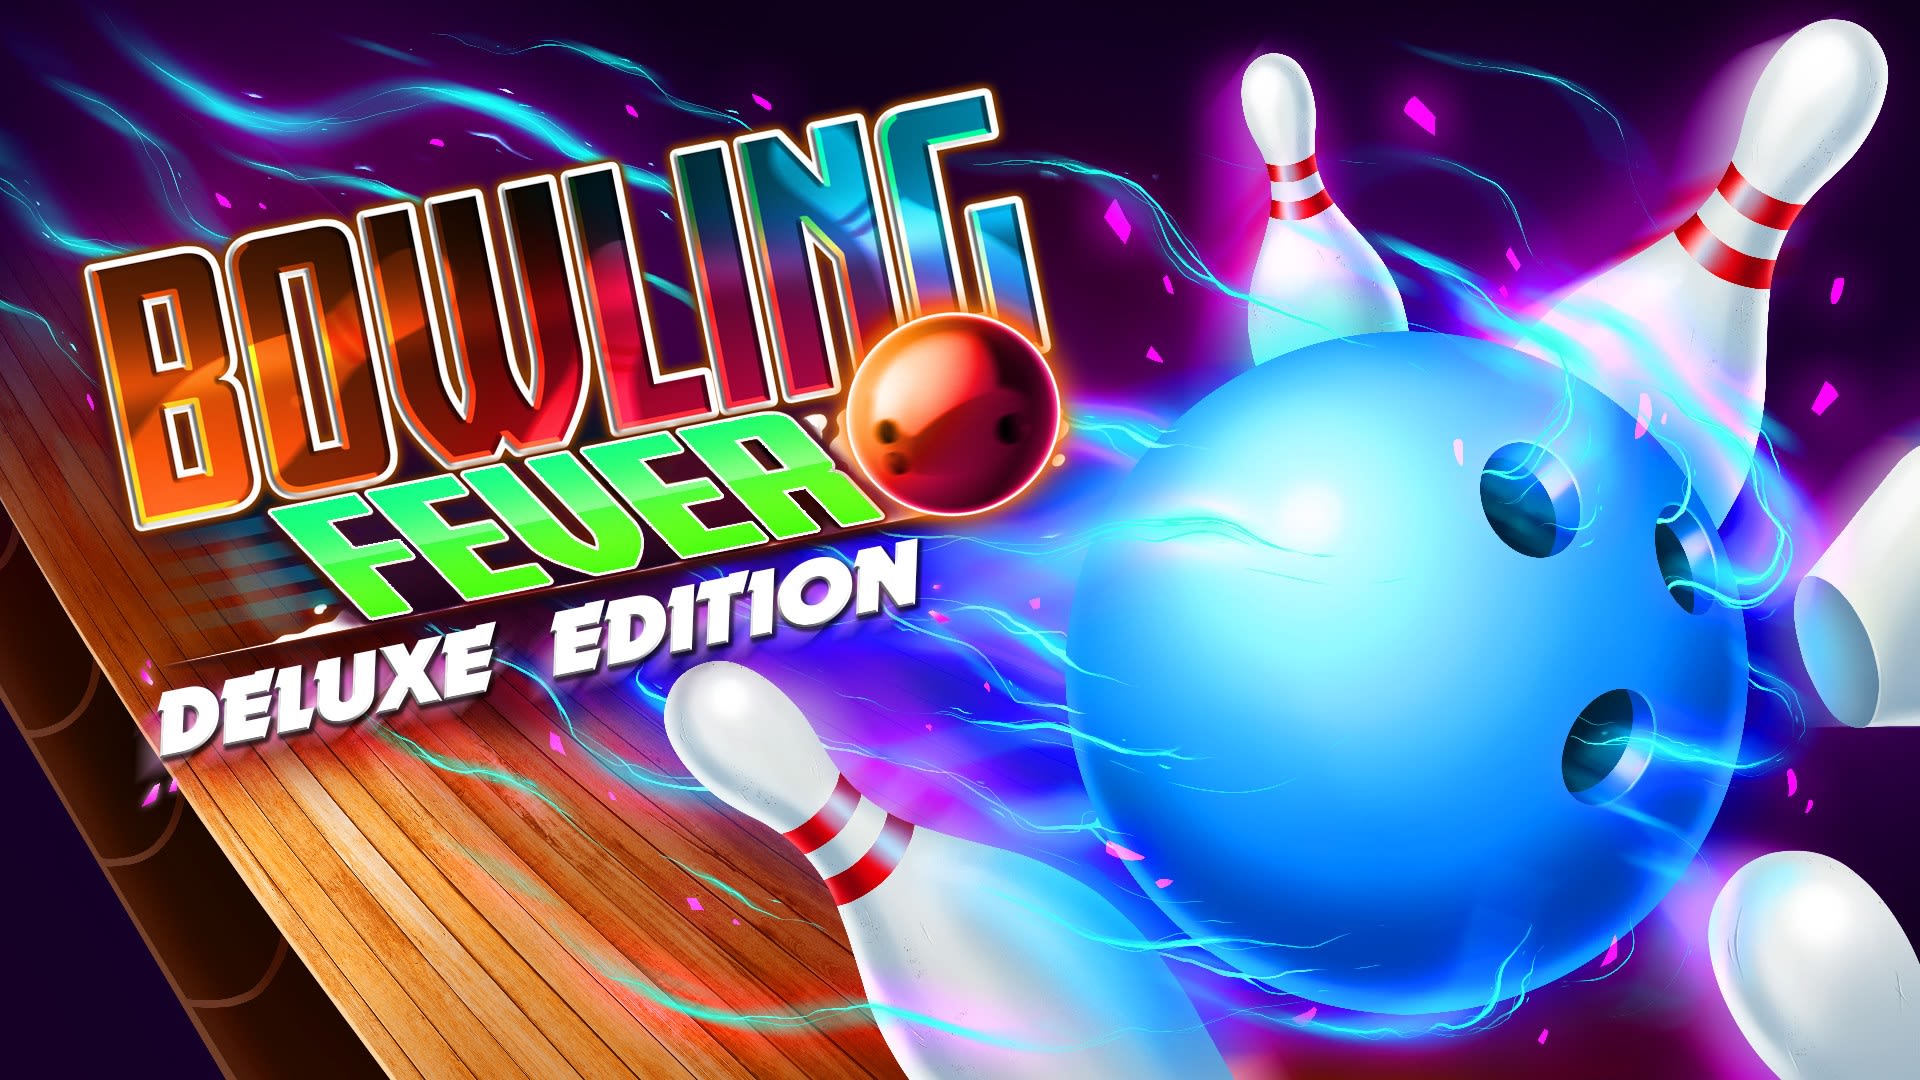 Bowling Fever Deluxe Edition